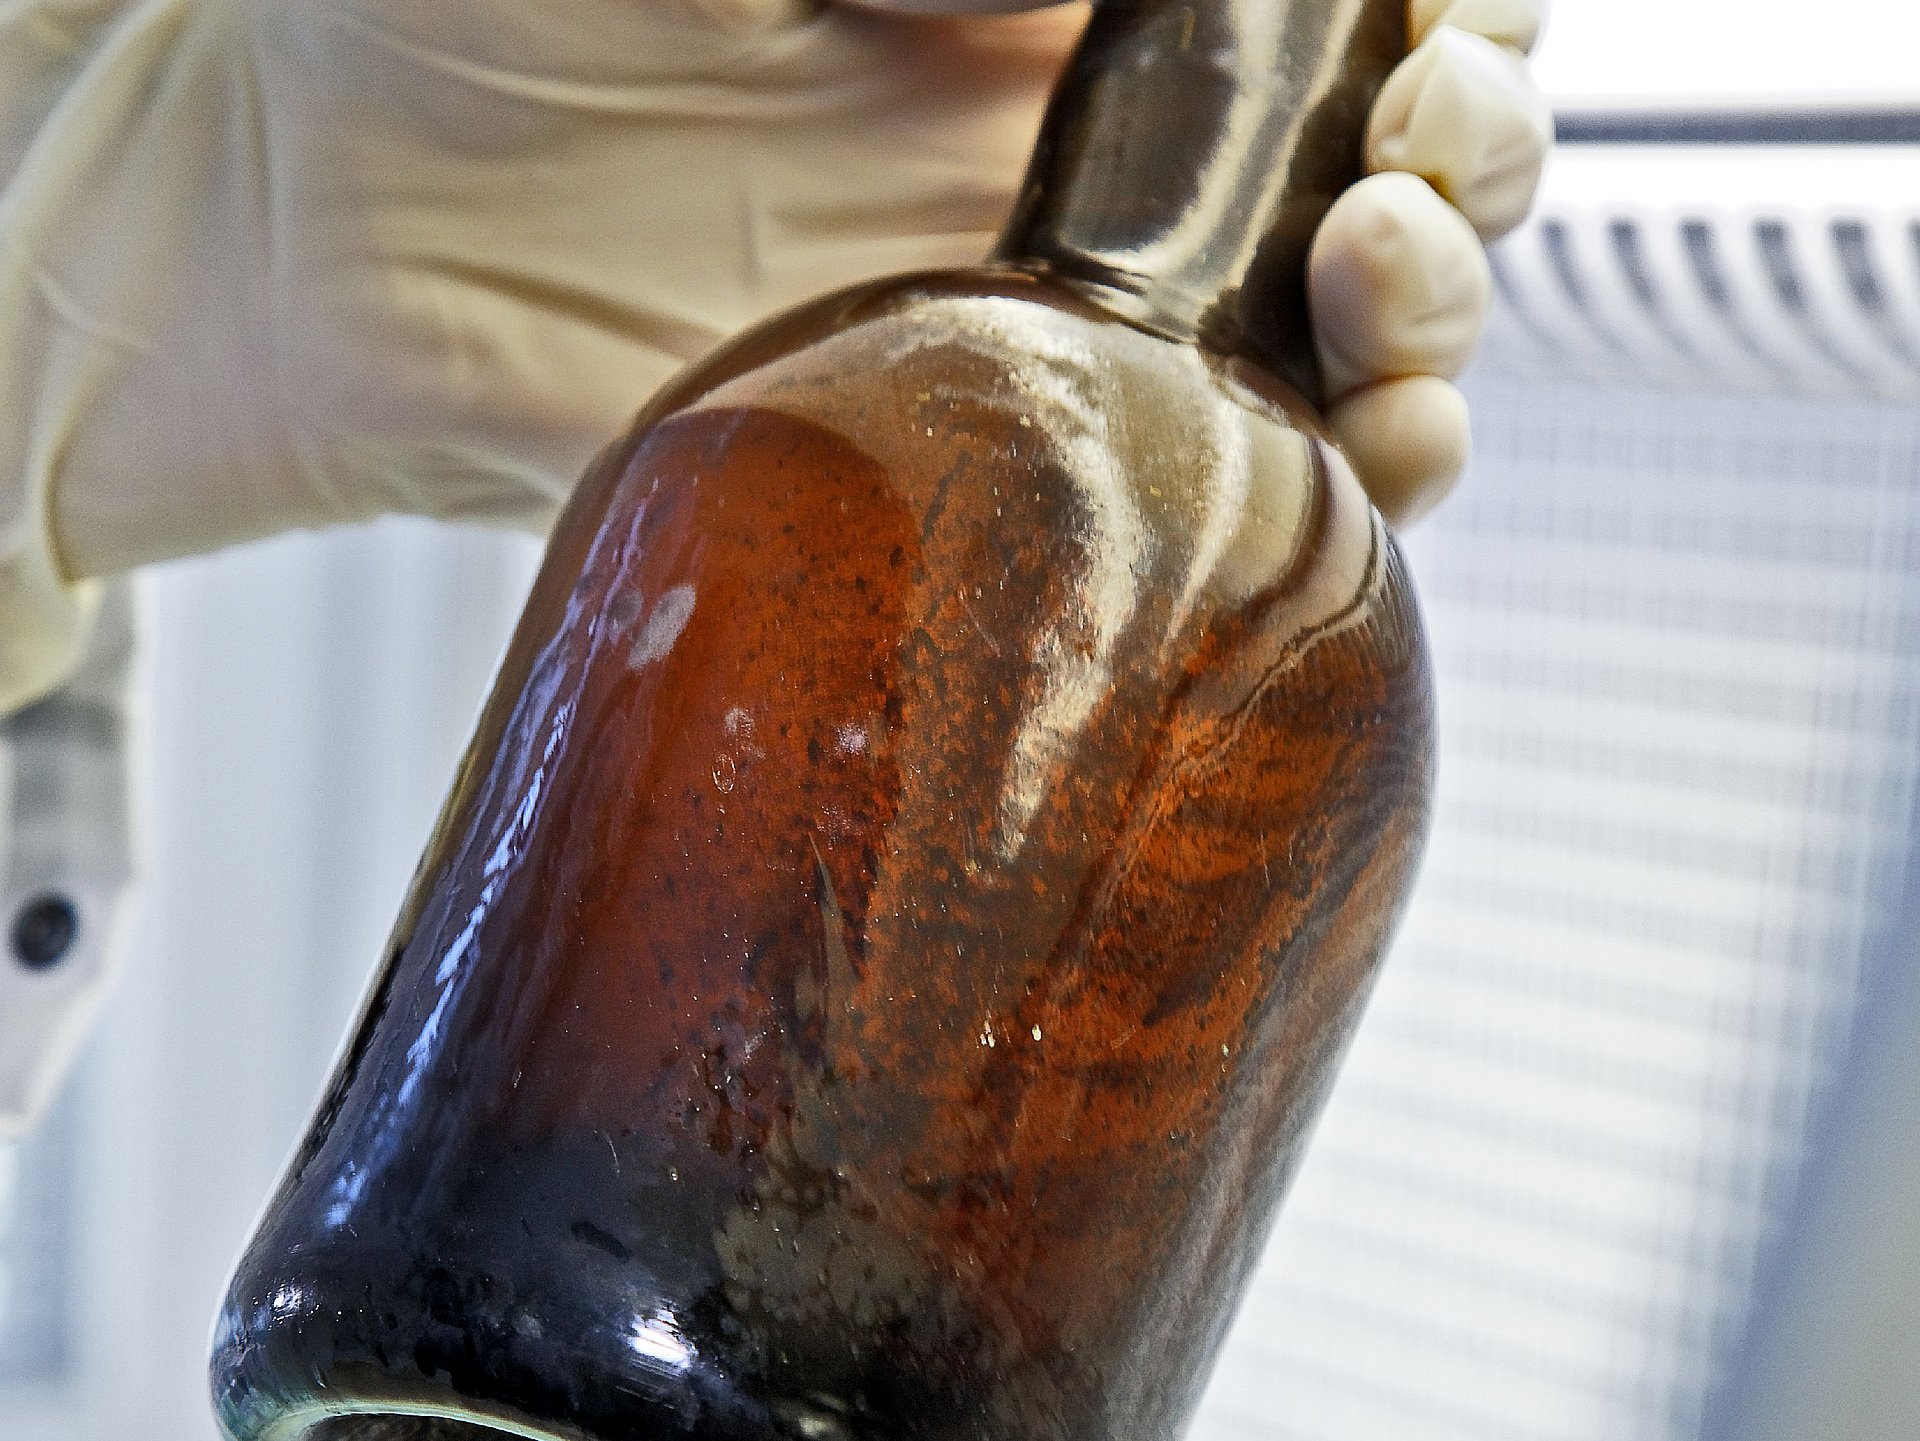 Beer from the 1840s shipwreck: chemical analyses yield clues to an old brew's recipe.